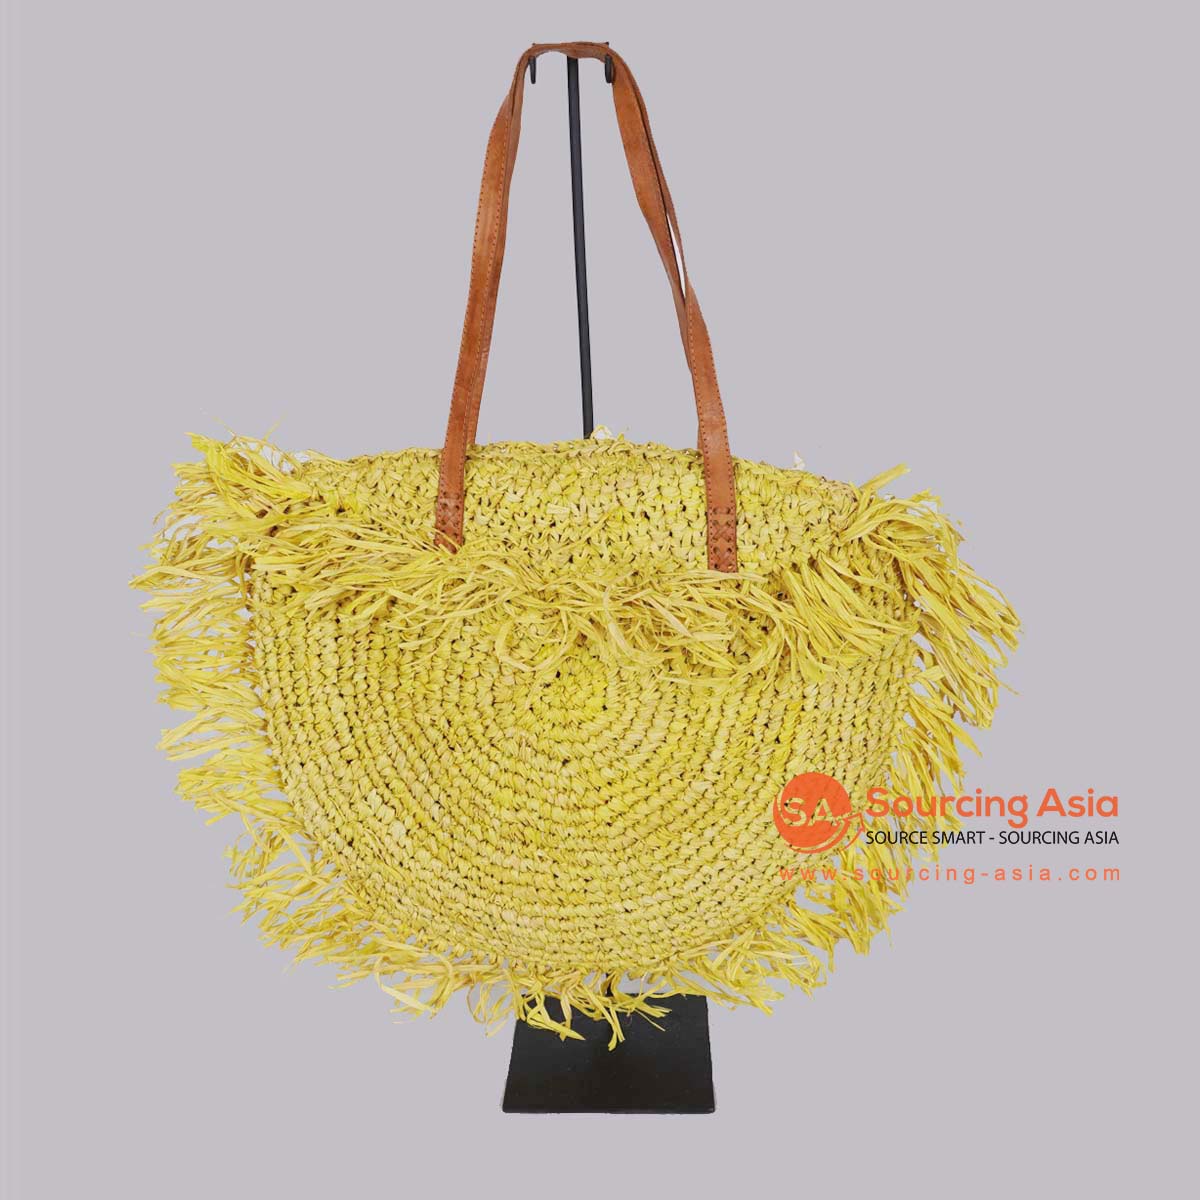 HBSC288 YELLOW GAJIH BAG WITH FRINGE AND LEATHER HANDLE